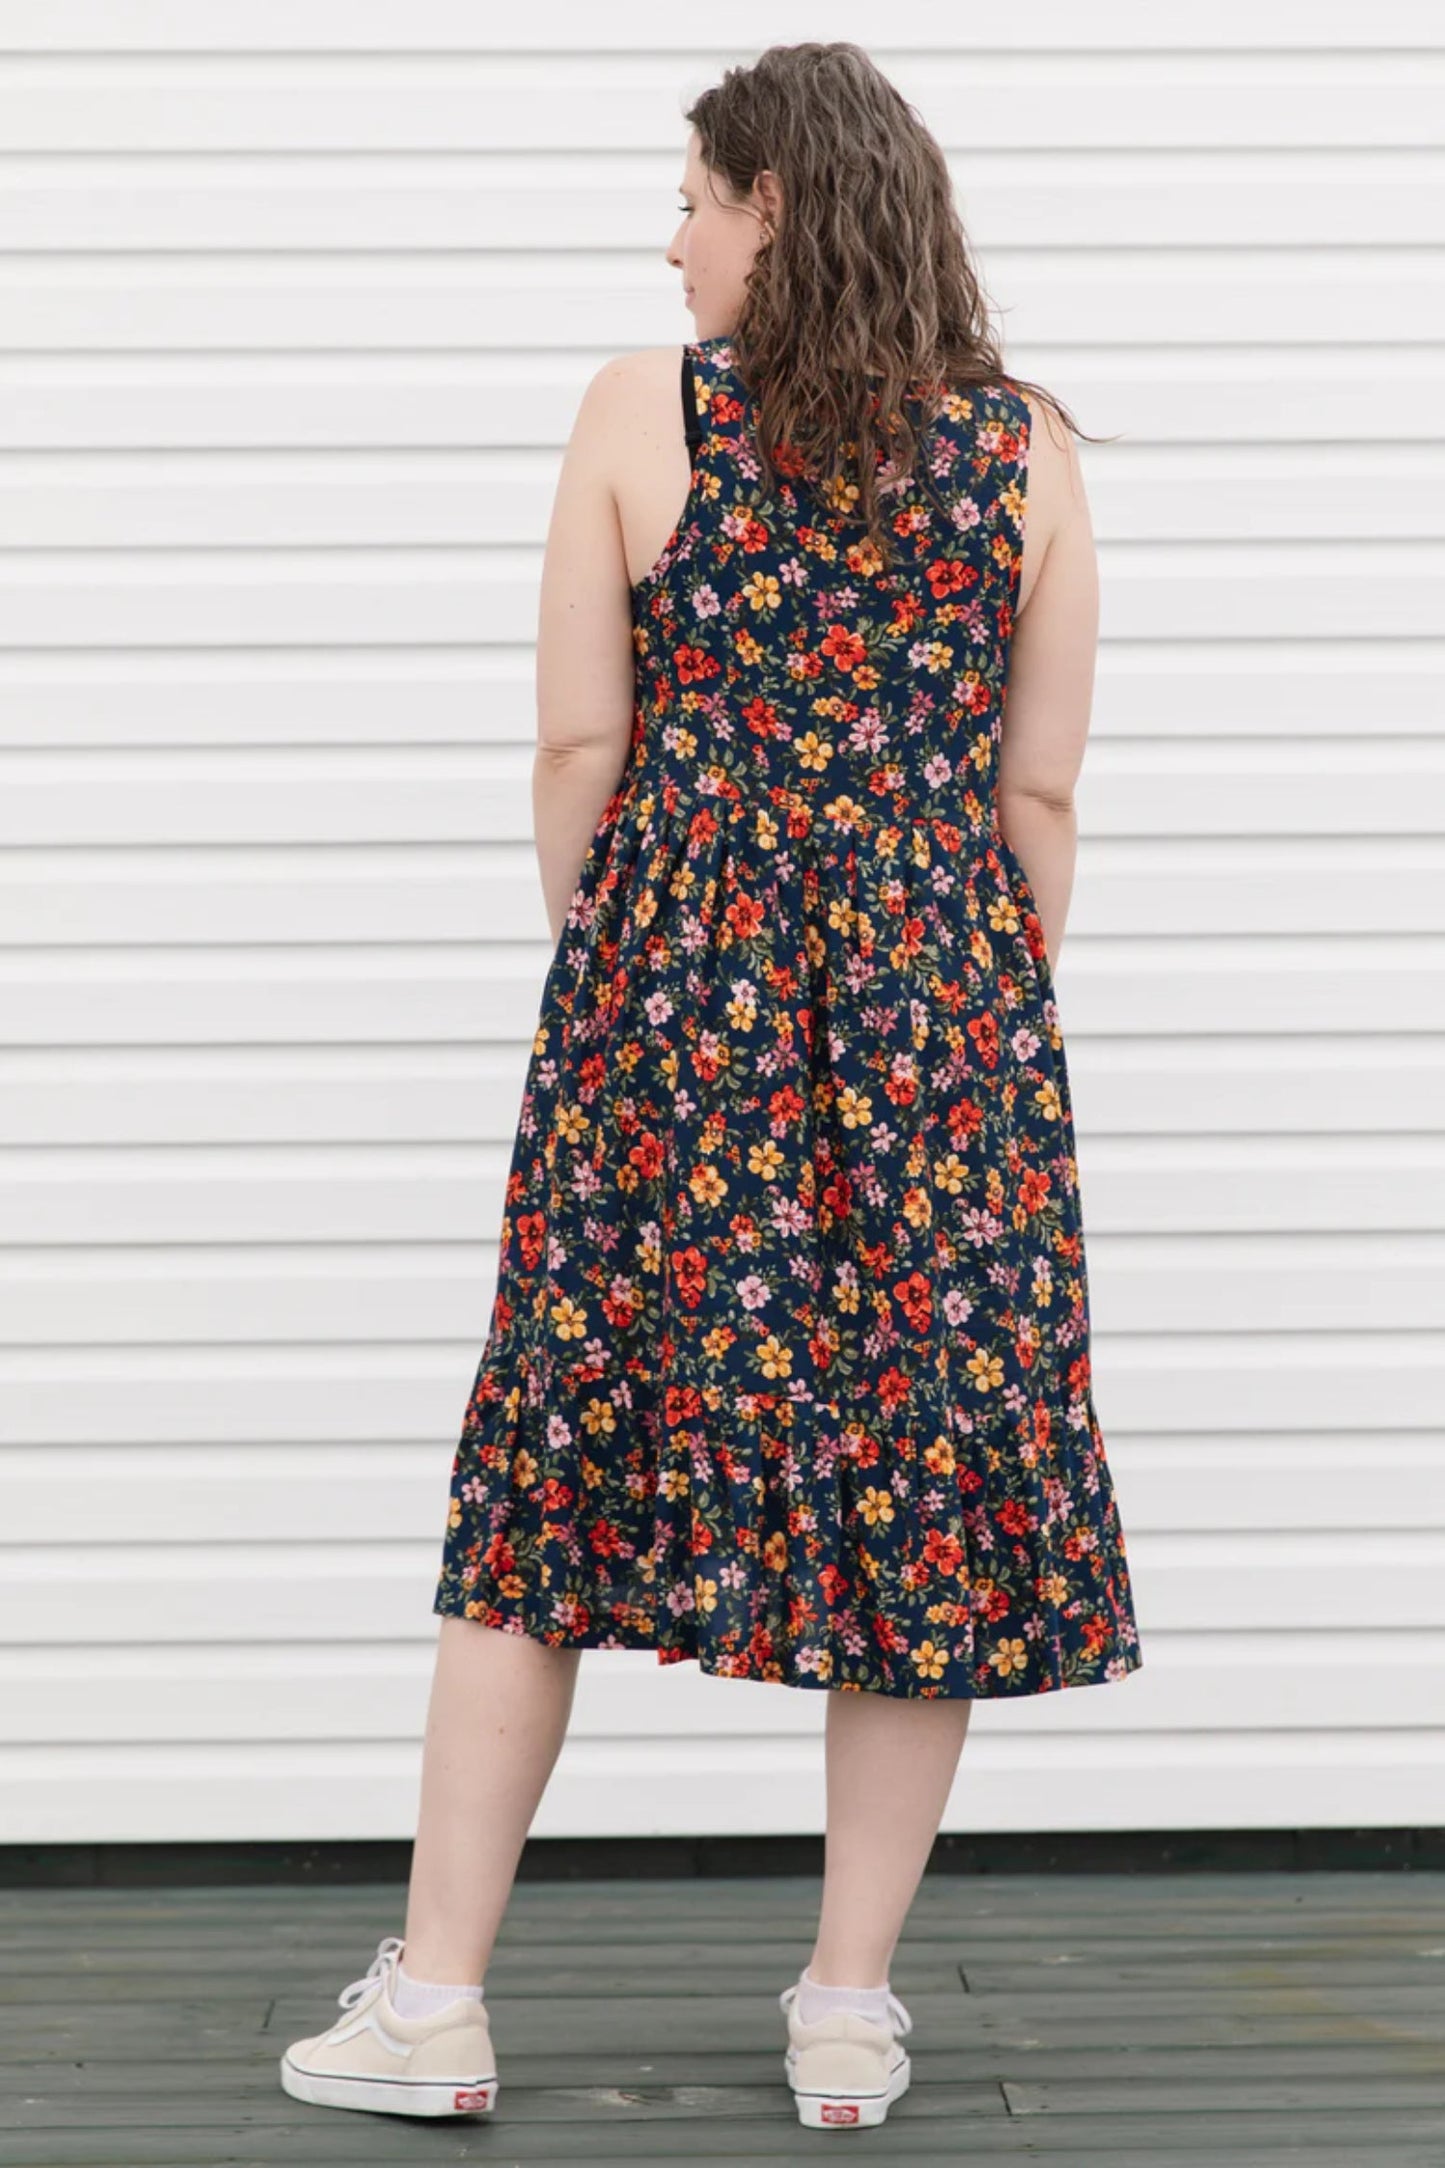 Rose Dress by Copious, Floral Print, back view, tank dress, loose fit, mid-calf length, pockets, cotton, linen, sizes XS to L, made in Ottawa